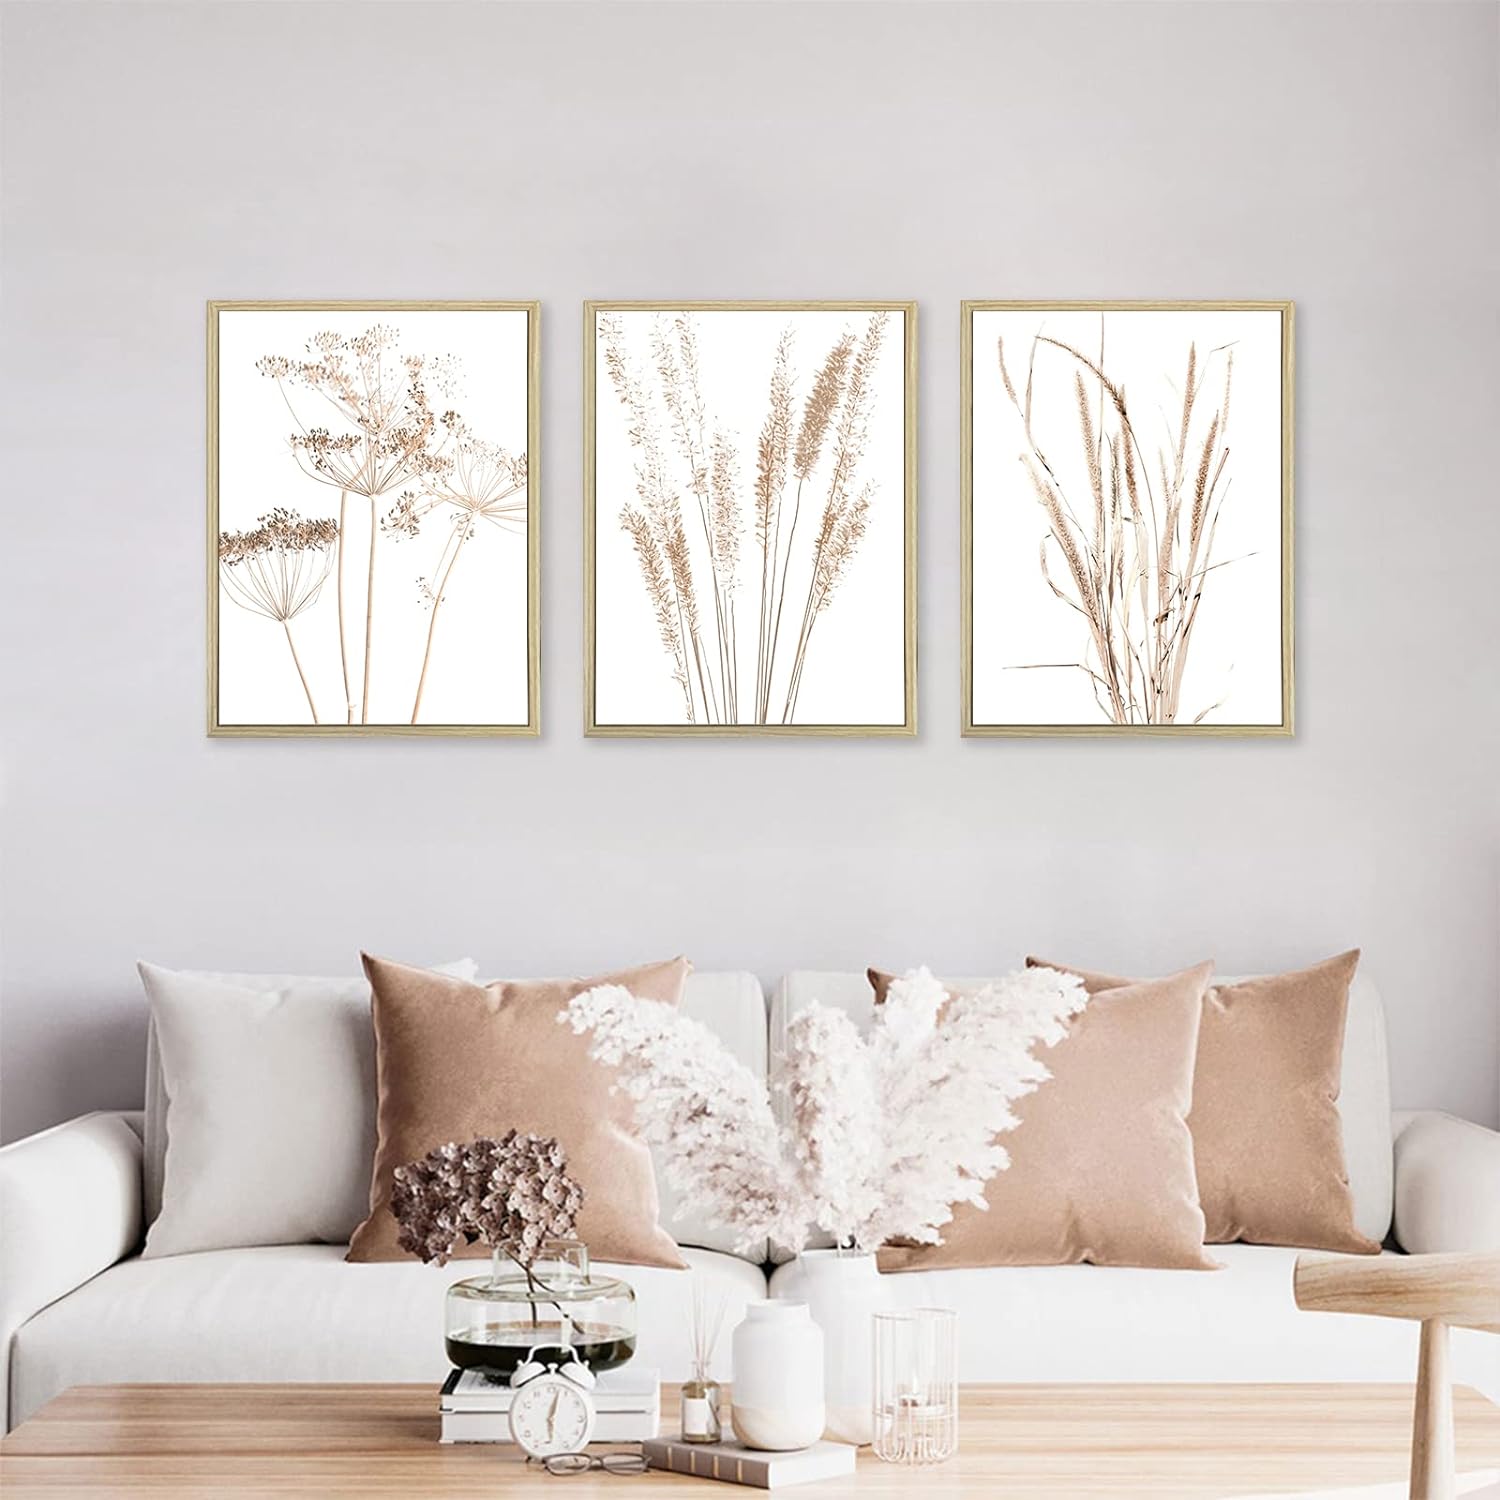 Best Boho Wall Art Ideas That You Need to Know